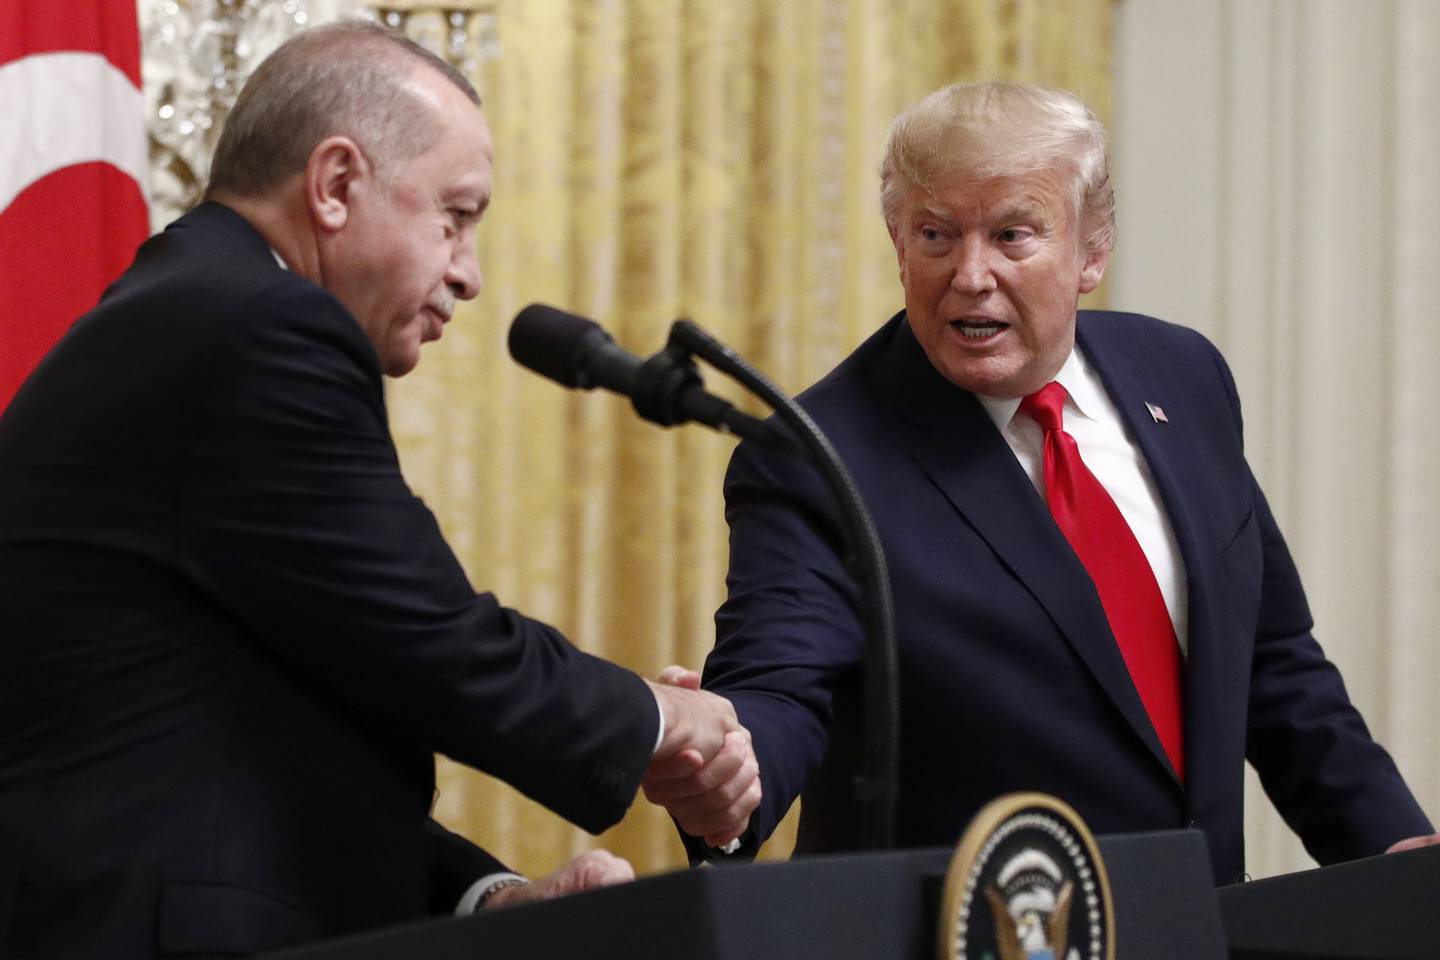 FILE - In this Nov. 13, 2019 file photo, President Donald Trump shakes hands with Turkish President Recep Tayyip Erdogan during a news conference in the East Room of the White House in Washington.  The State Department says recent congressional action to recognize the Armenian genocide does not reflect Trump administration policy. That statement is likely to pleaseErdogan. The Senate voted unanimously last week to recognize the mass killings of more than a million Armenians by Ottoman Turks a century ago as a genocide.  (AP Photo/Patrick Semansky)